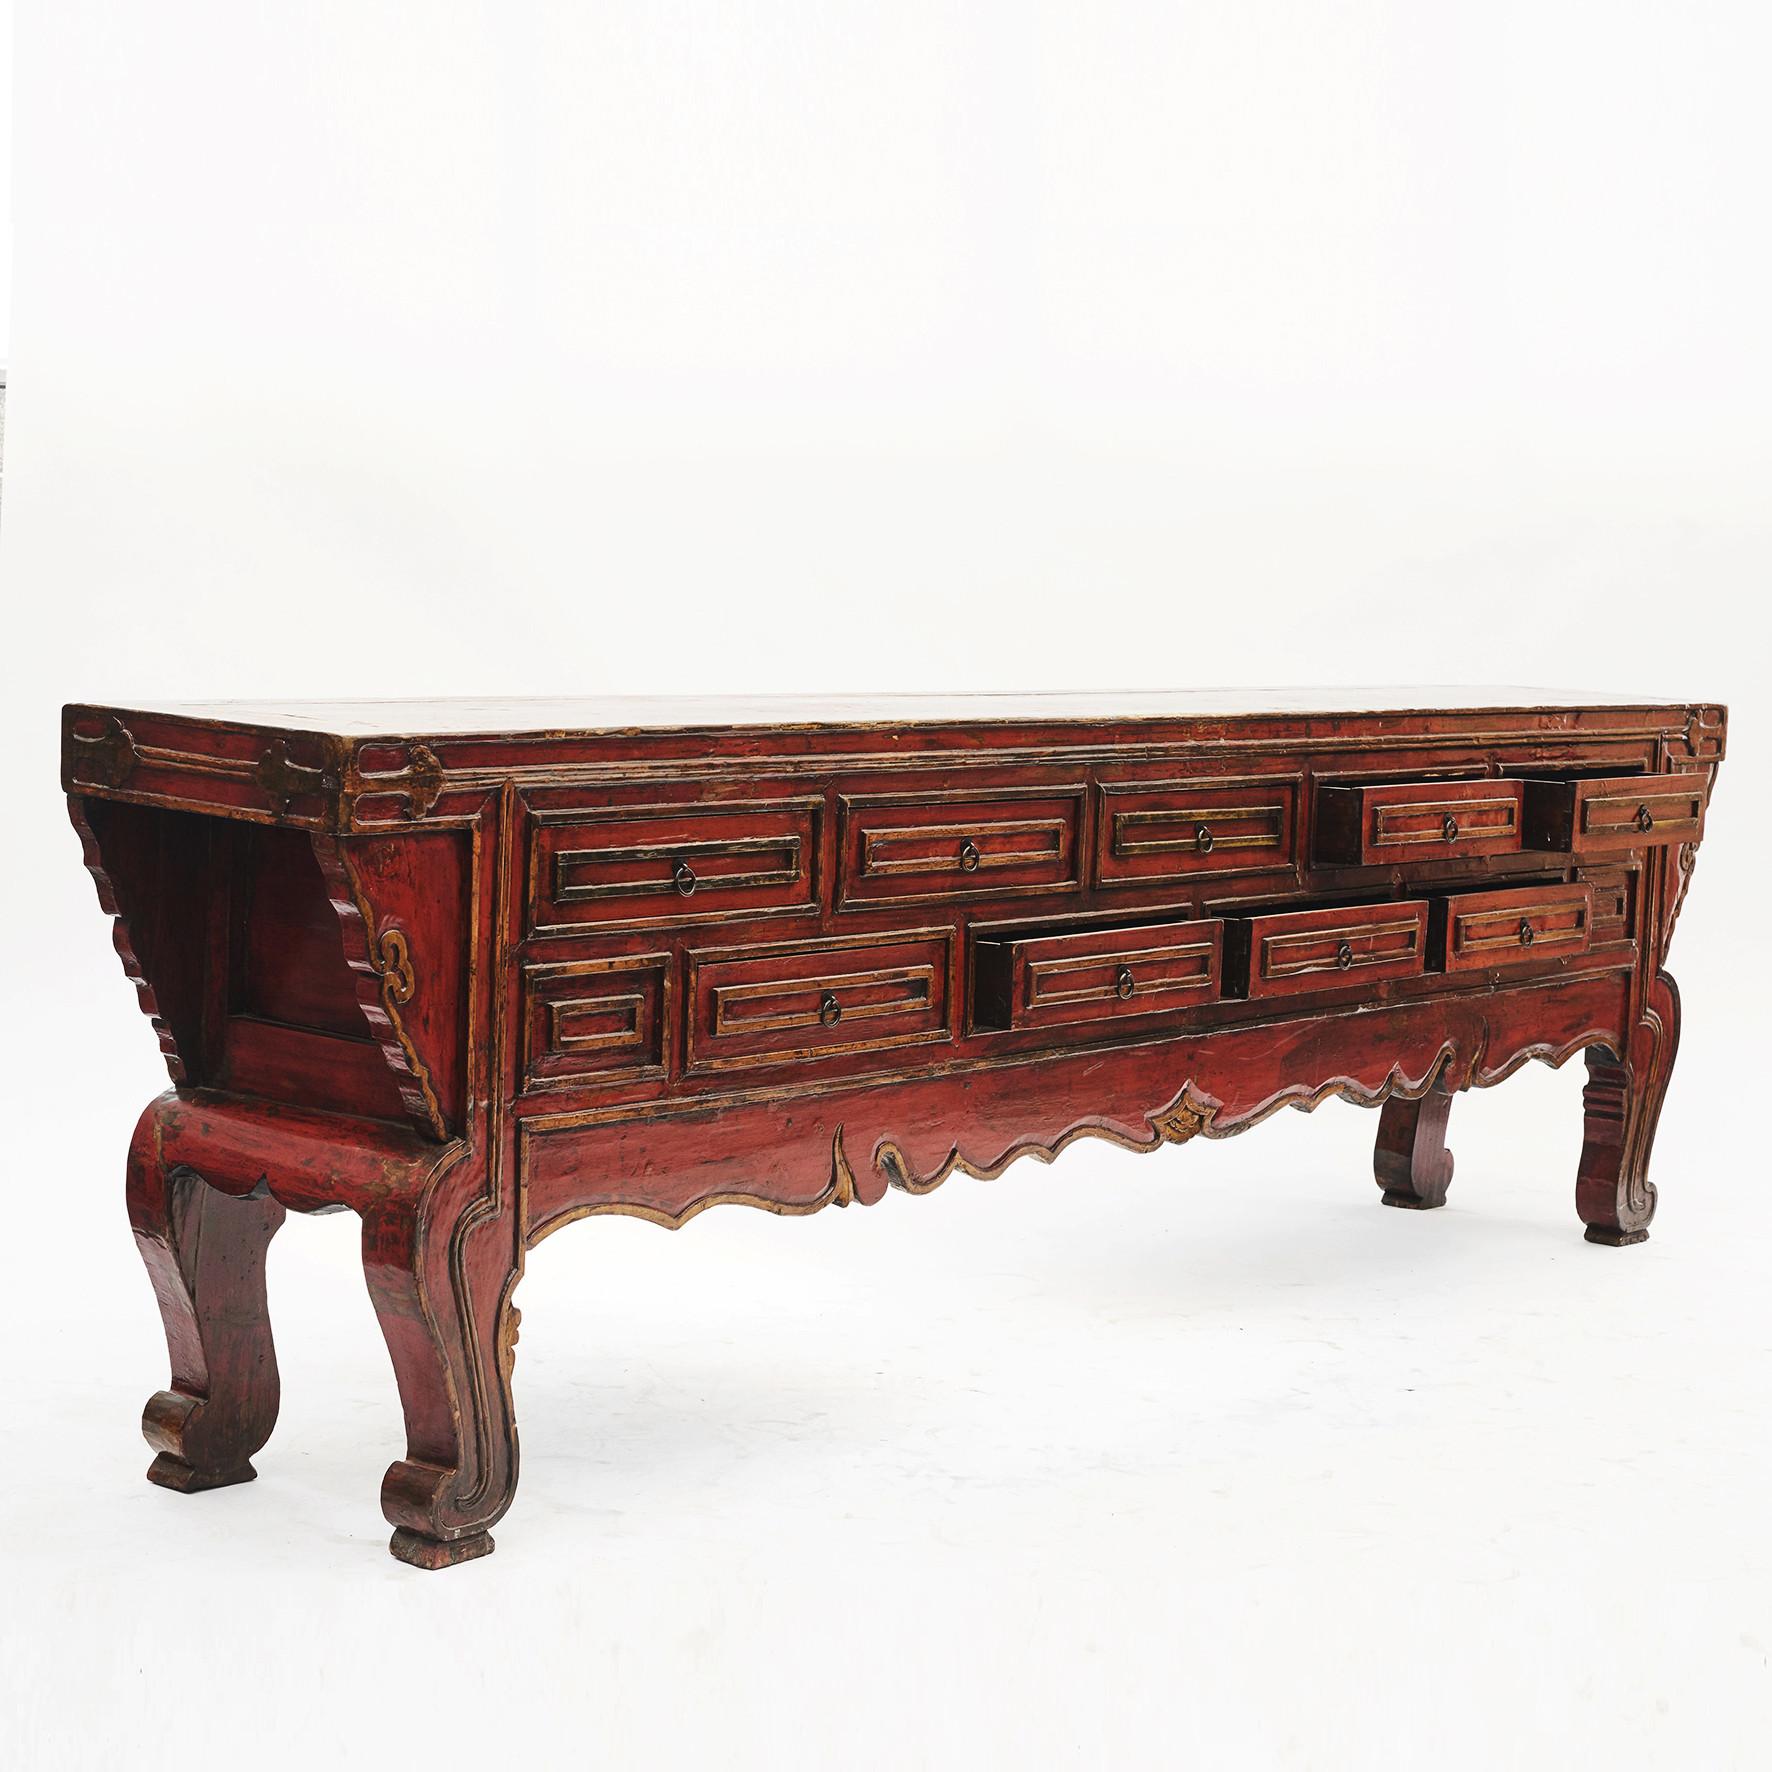 Rare large altar sideboard (size - 323 cm long).
Elm wood and original red lacquer, moldings and carvings in original yellow lacquer.
9 drawers.

Beautiful age-related patina, highlighted by a clear lacquer finish.
From Buddhist temple in